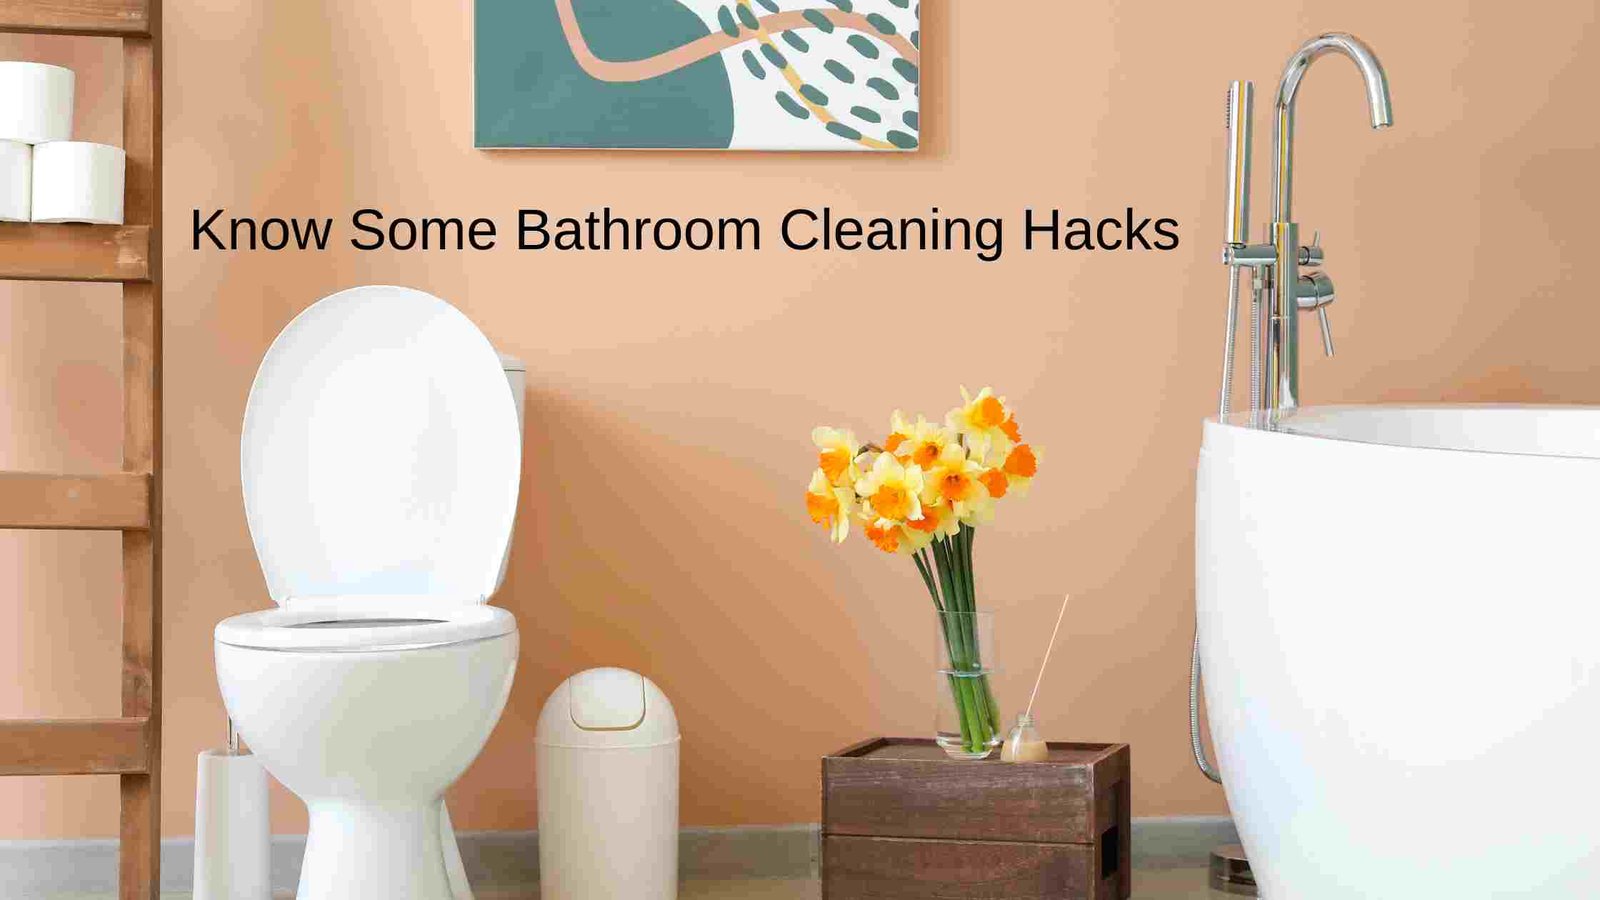 Know Some Bathroom Cleaning Hacks